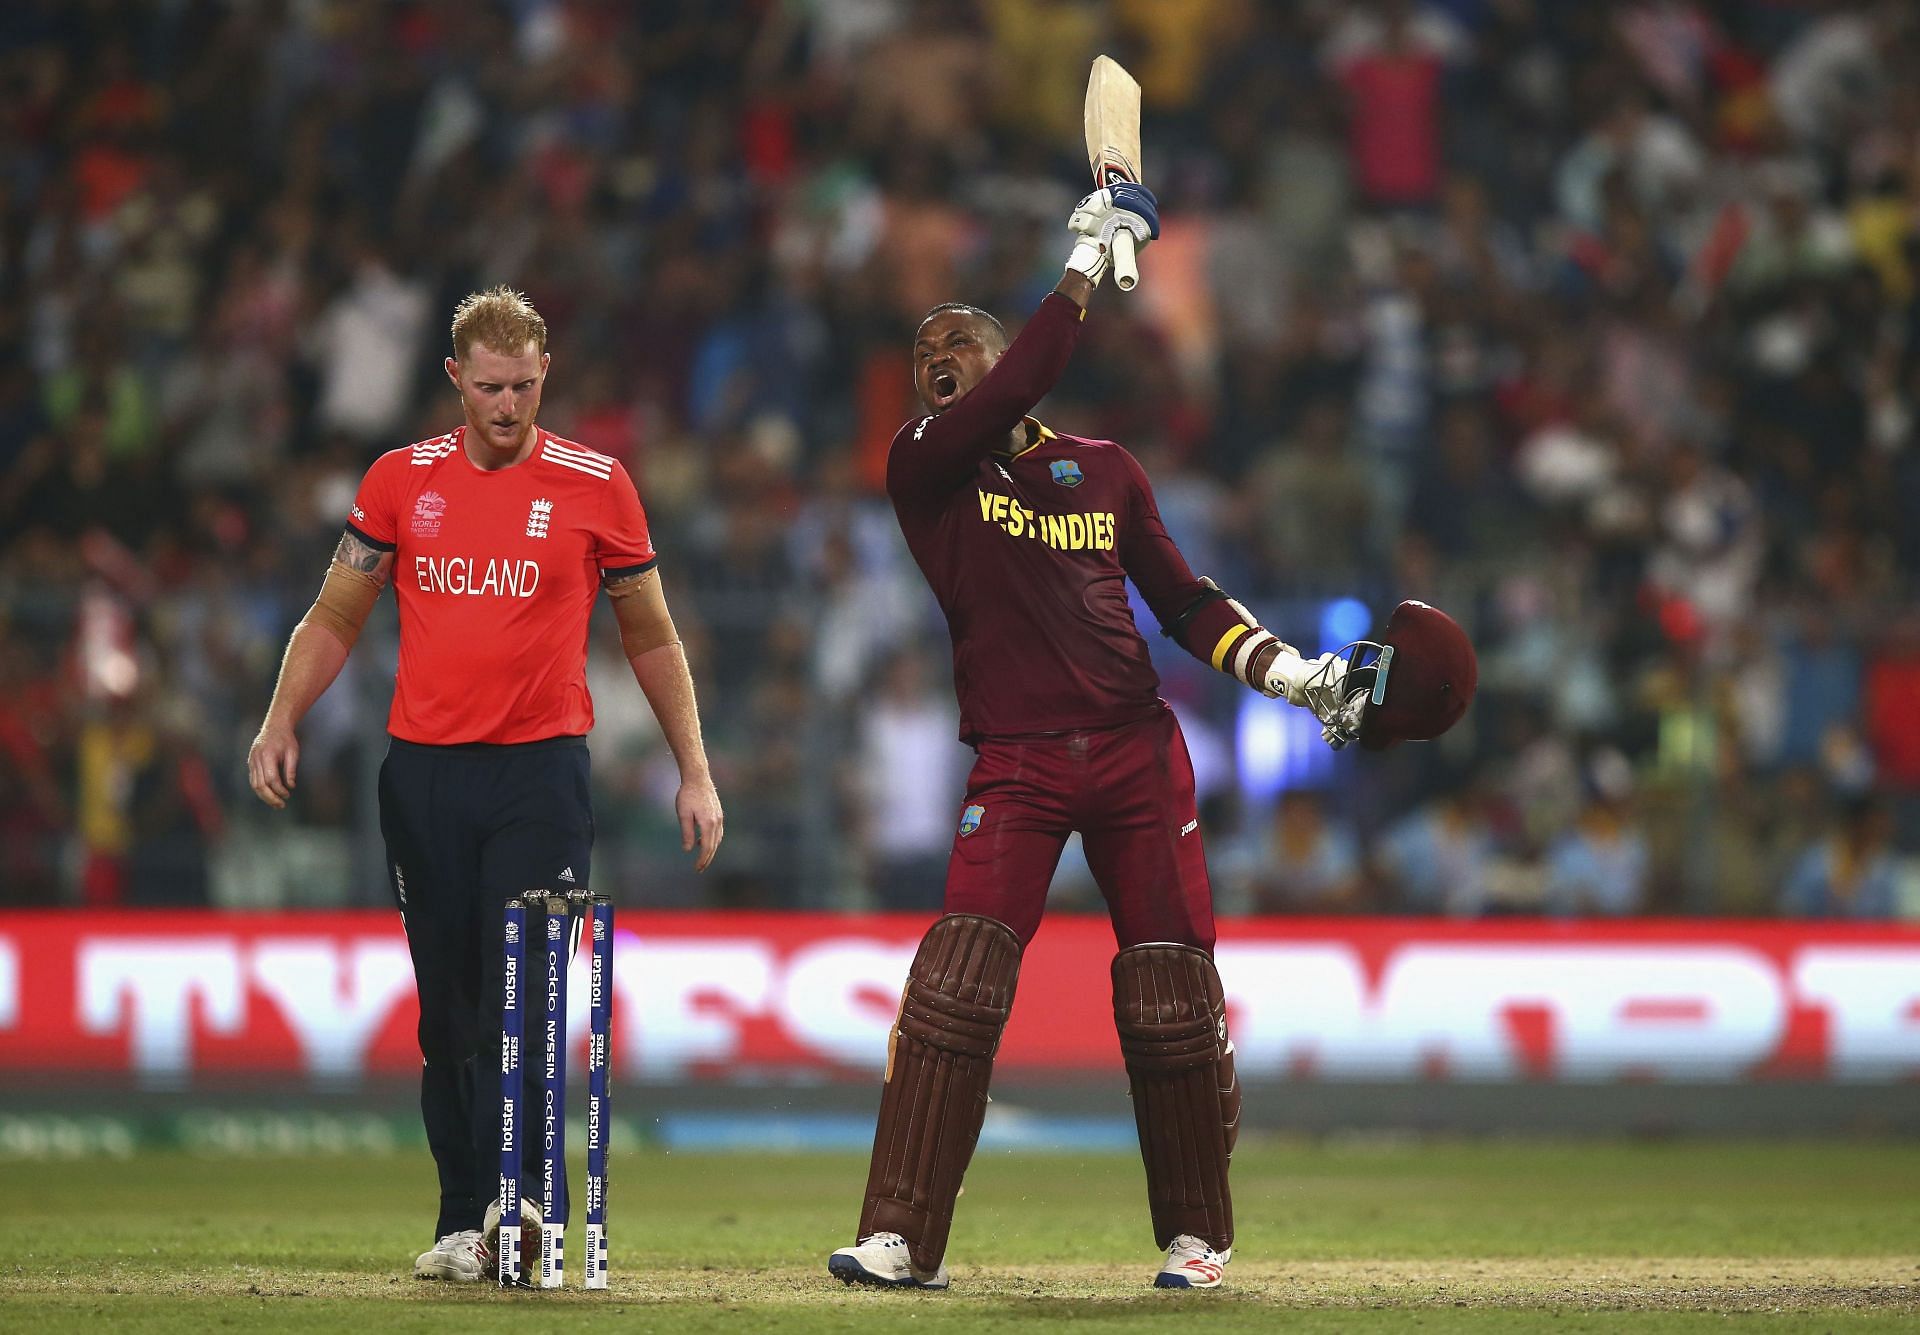 West Indies have won the ICC T20 World Cup twice